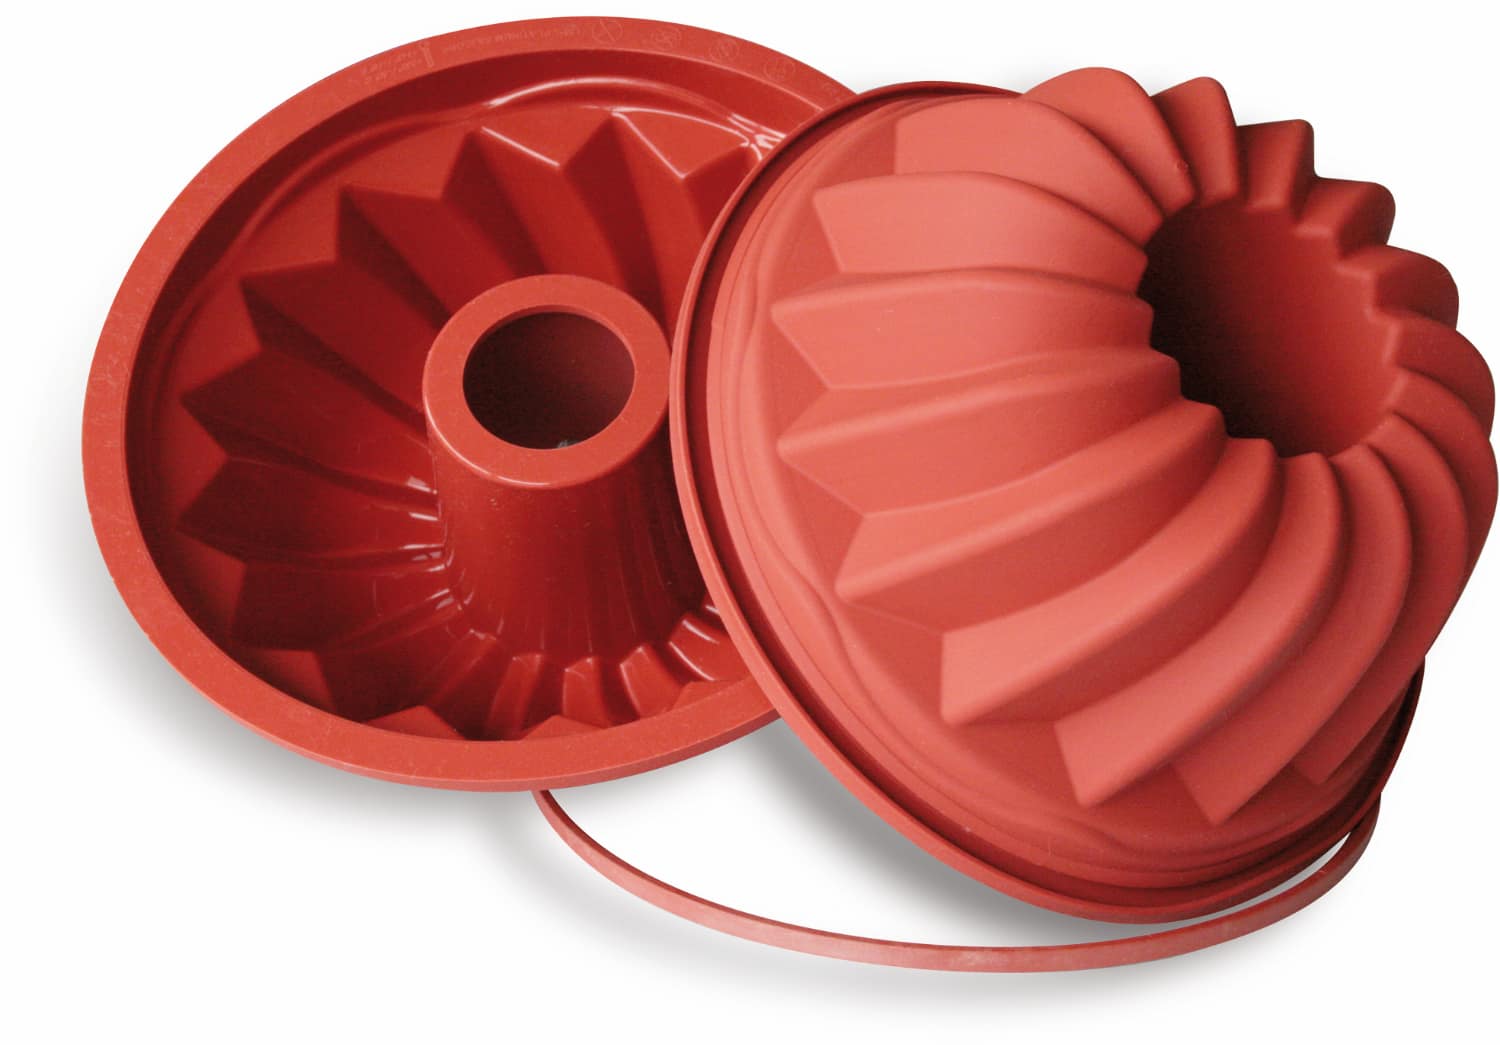 Silicone baking mould "Gugelhupf"